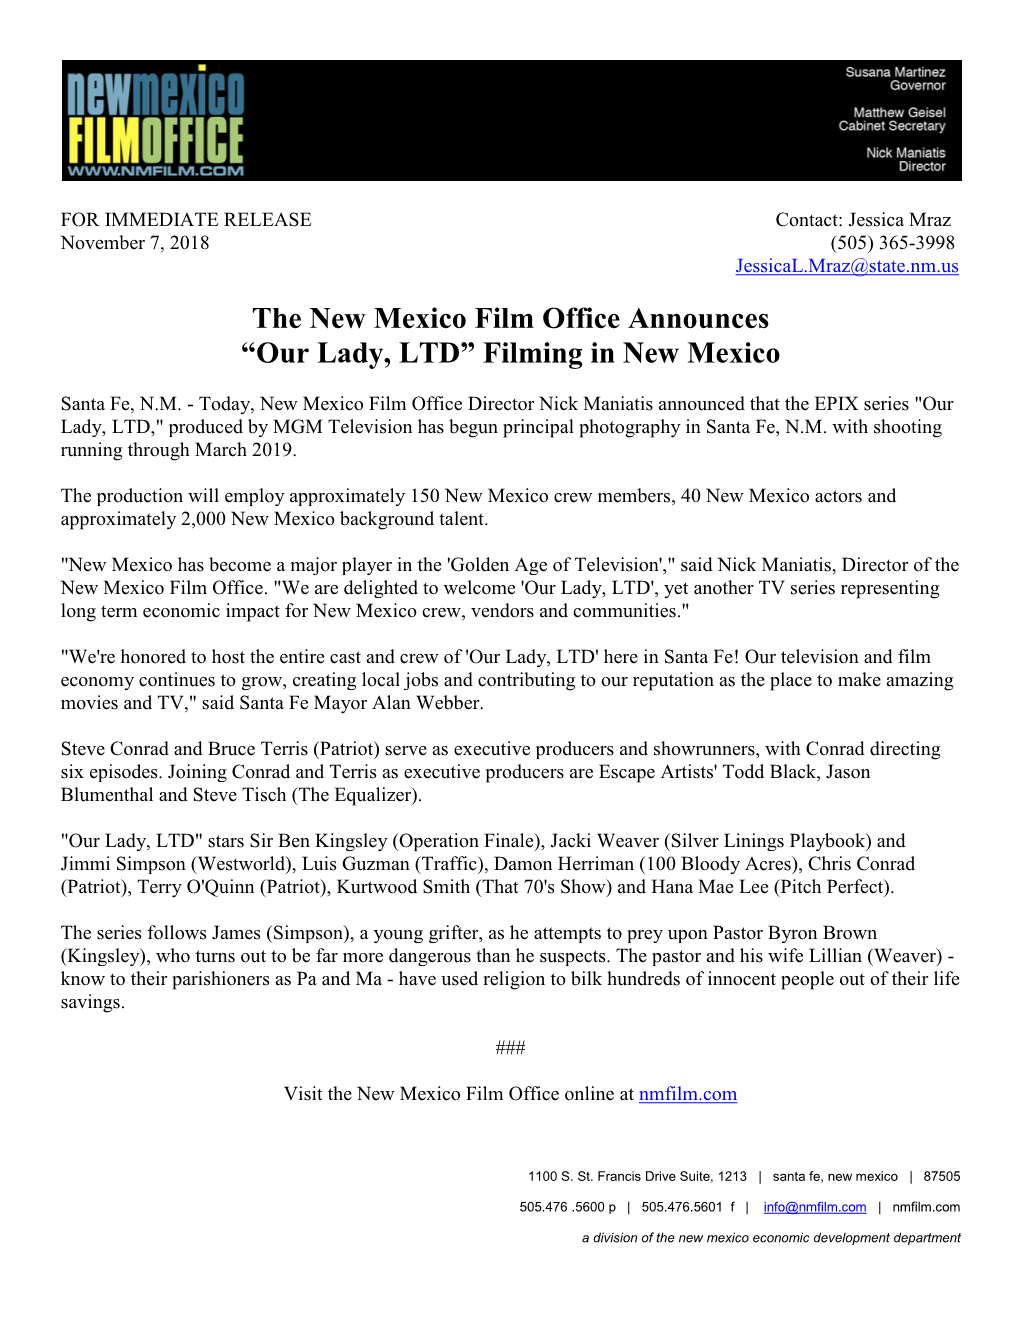 The New Mexico Film Office Announces “Our Lady, LTD” Filming in New Mexico